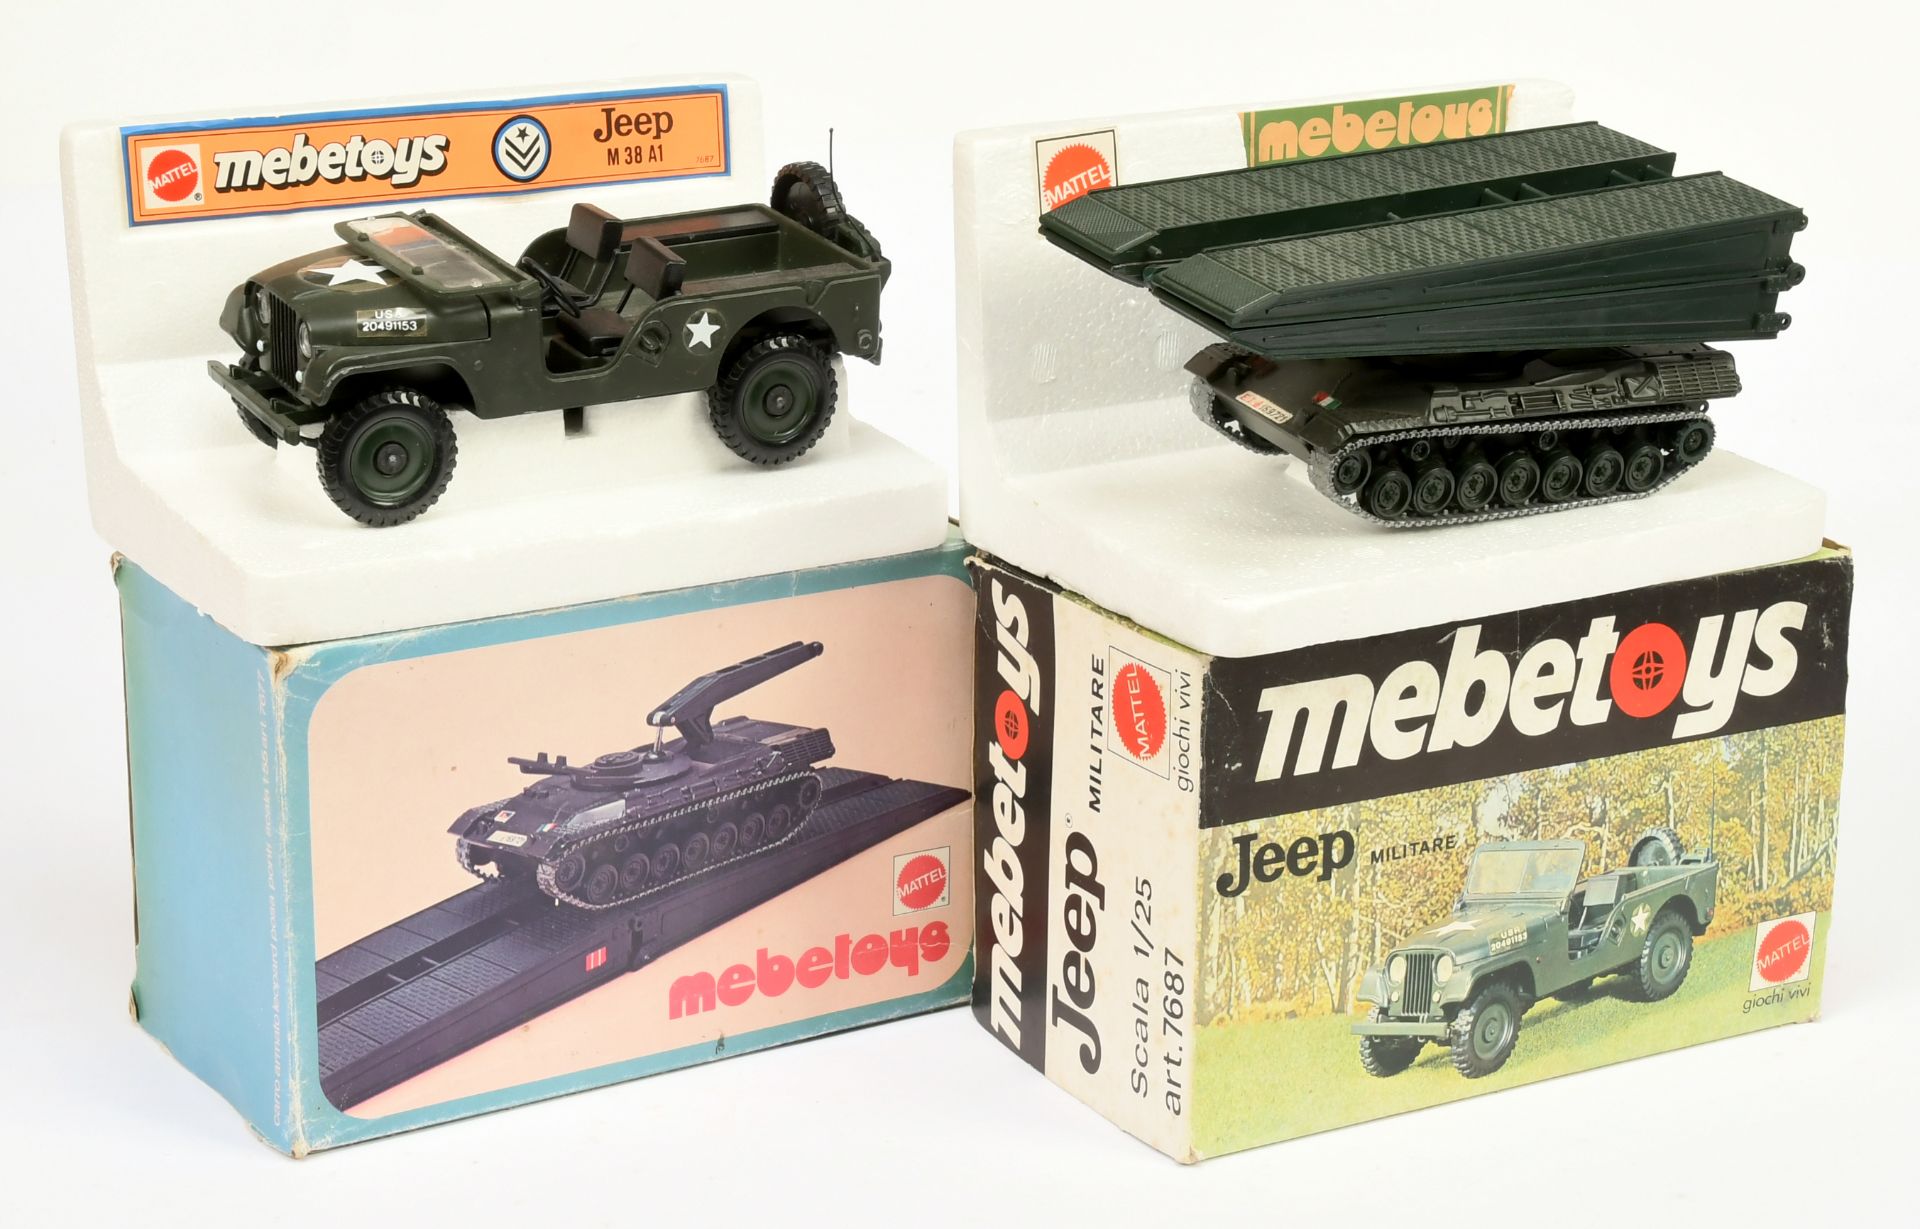 Mebetoys (1/55th) scale military pair - (1) 7677 leopard bridge layer and (2) 7687 Jeep